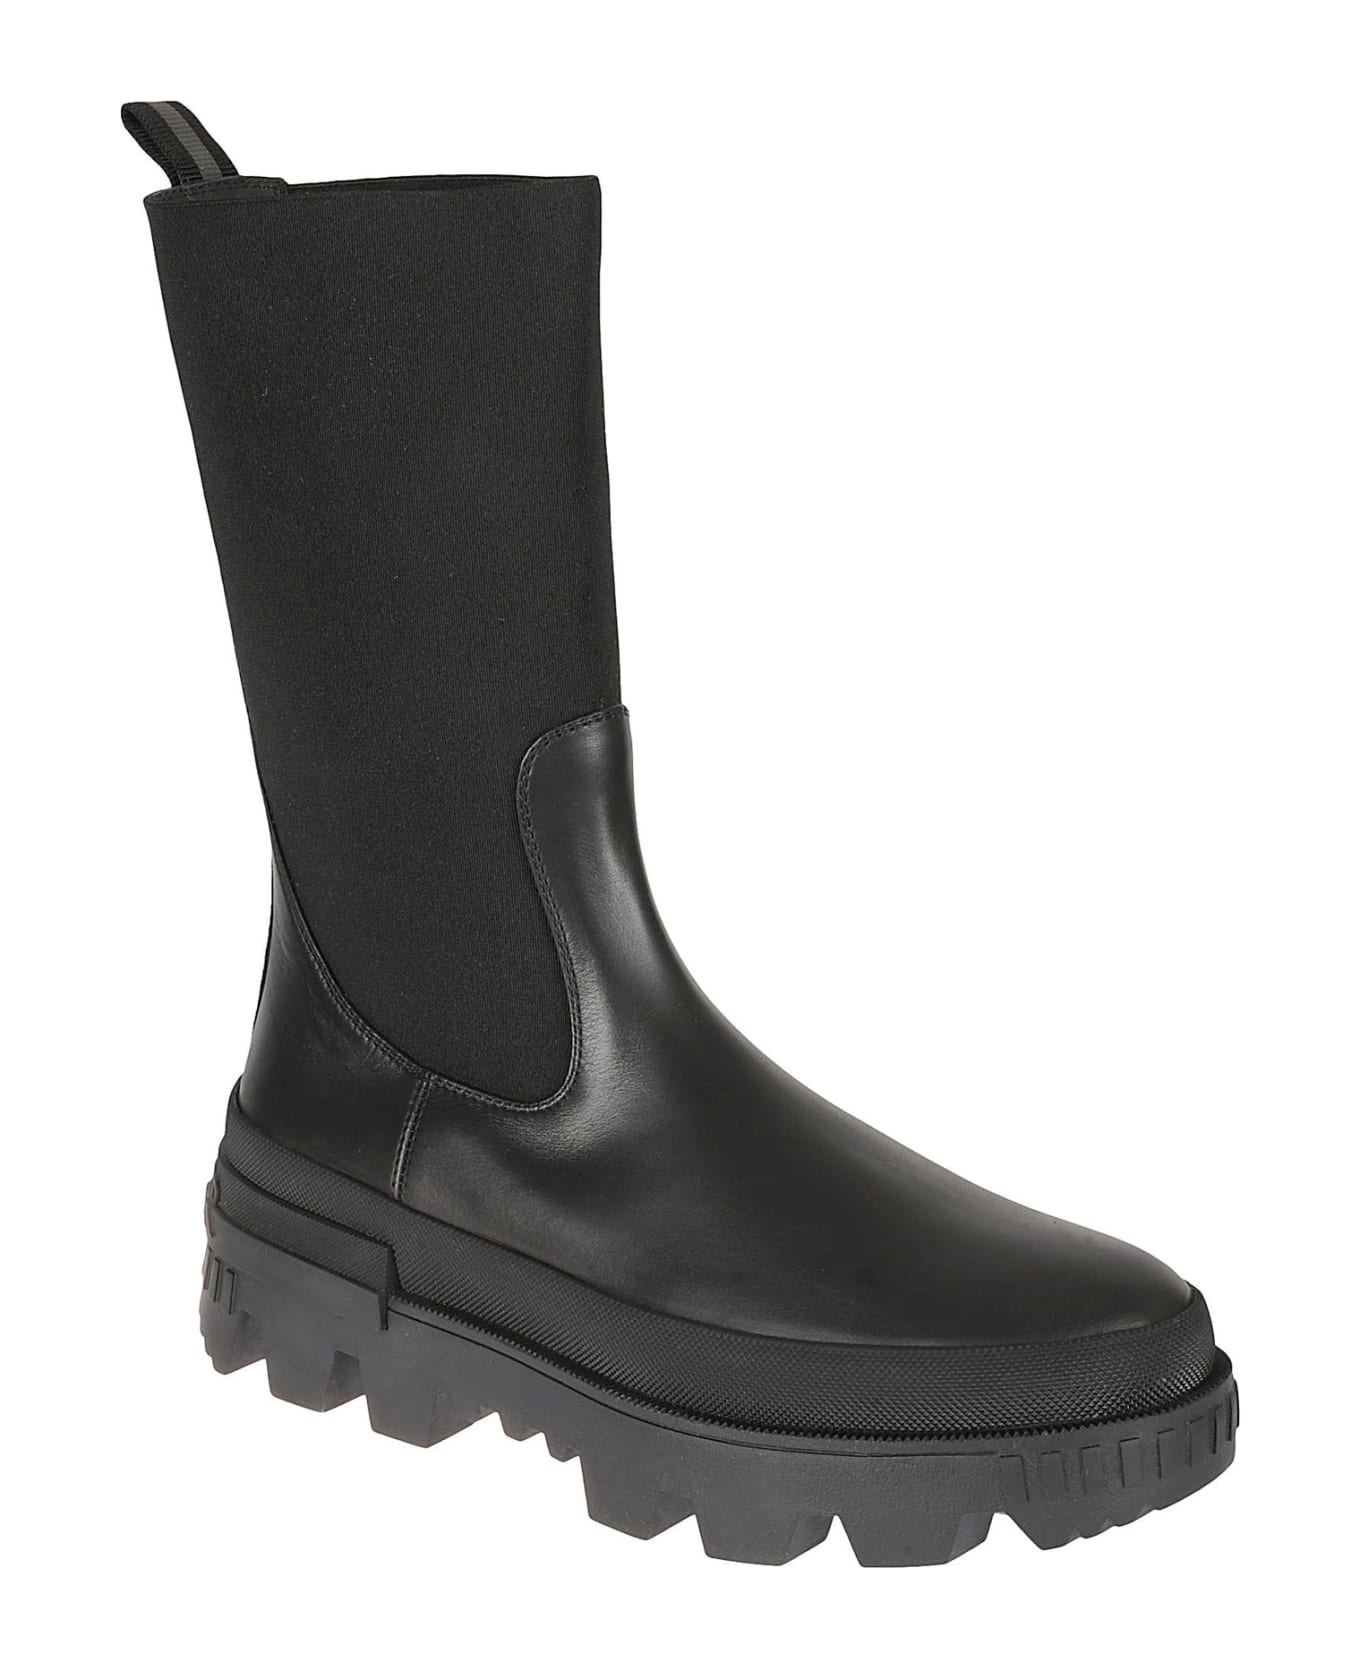 Moncler Leather Logo Boots - Black ブーツ